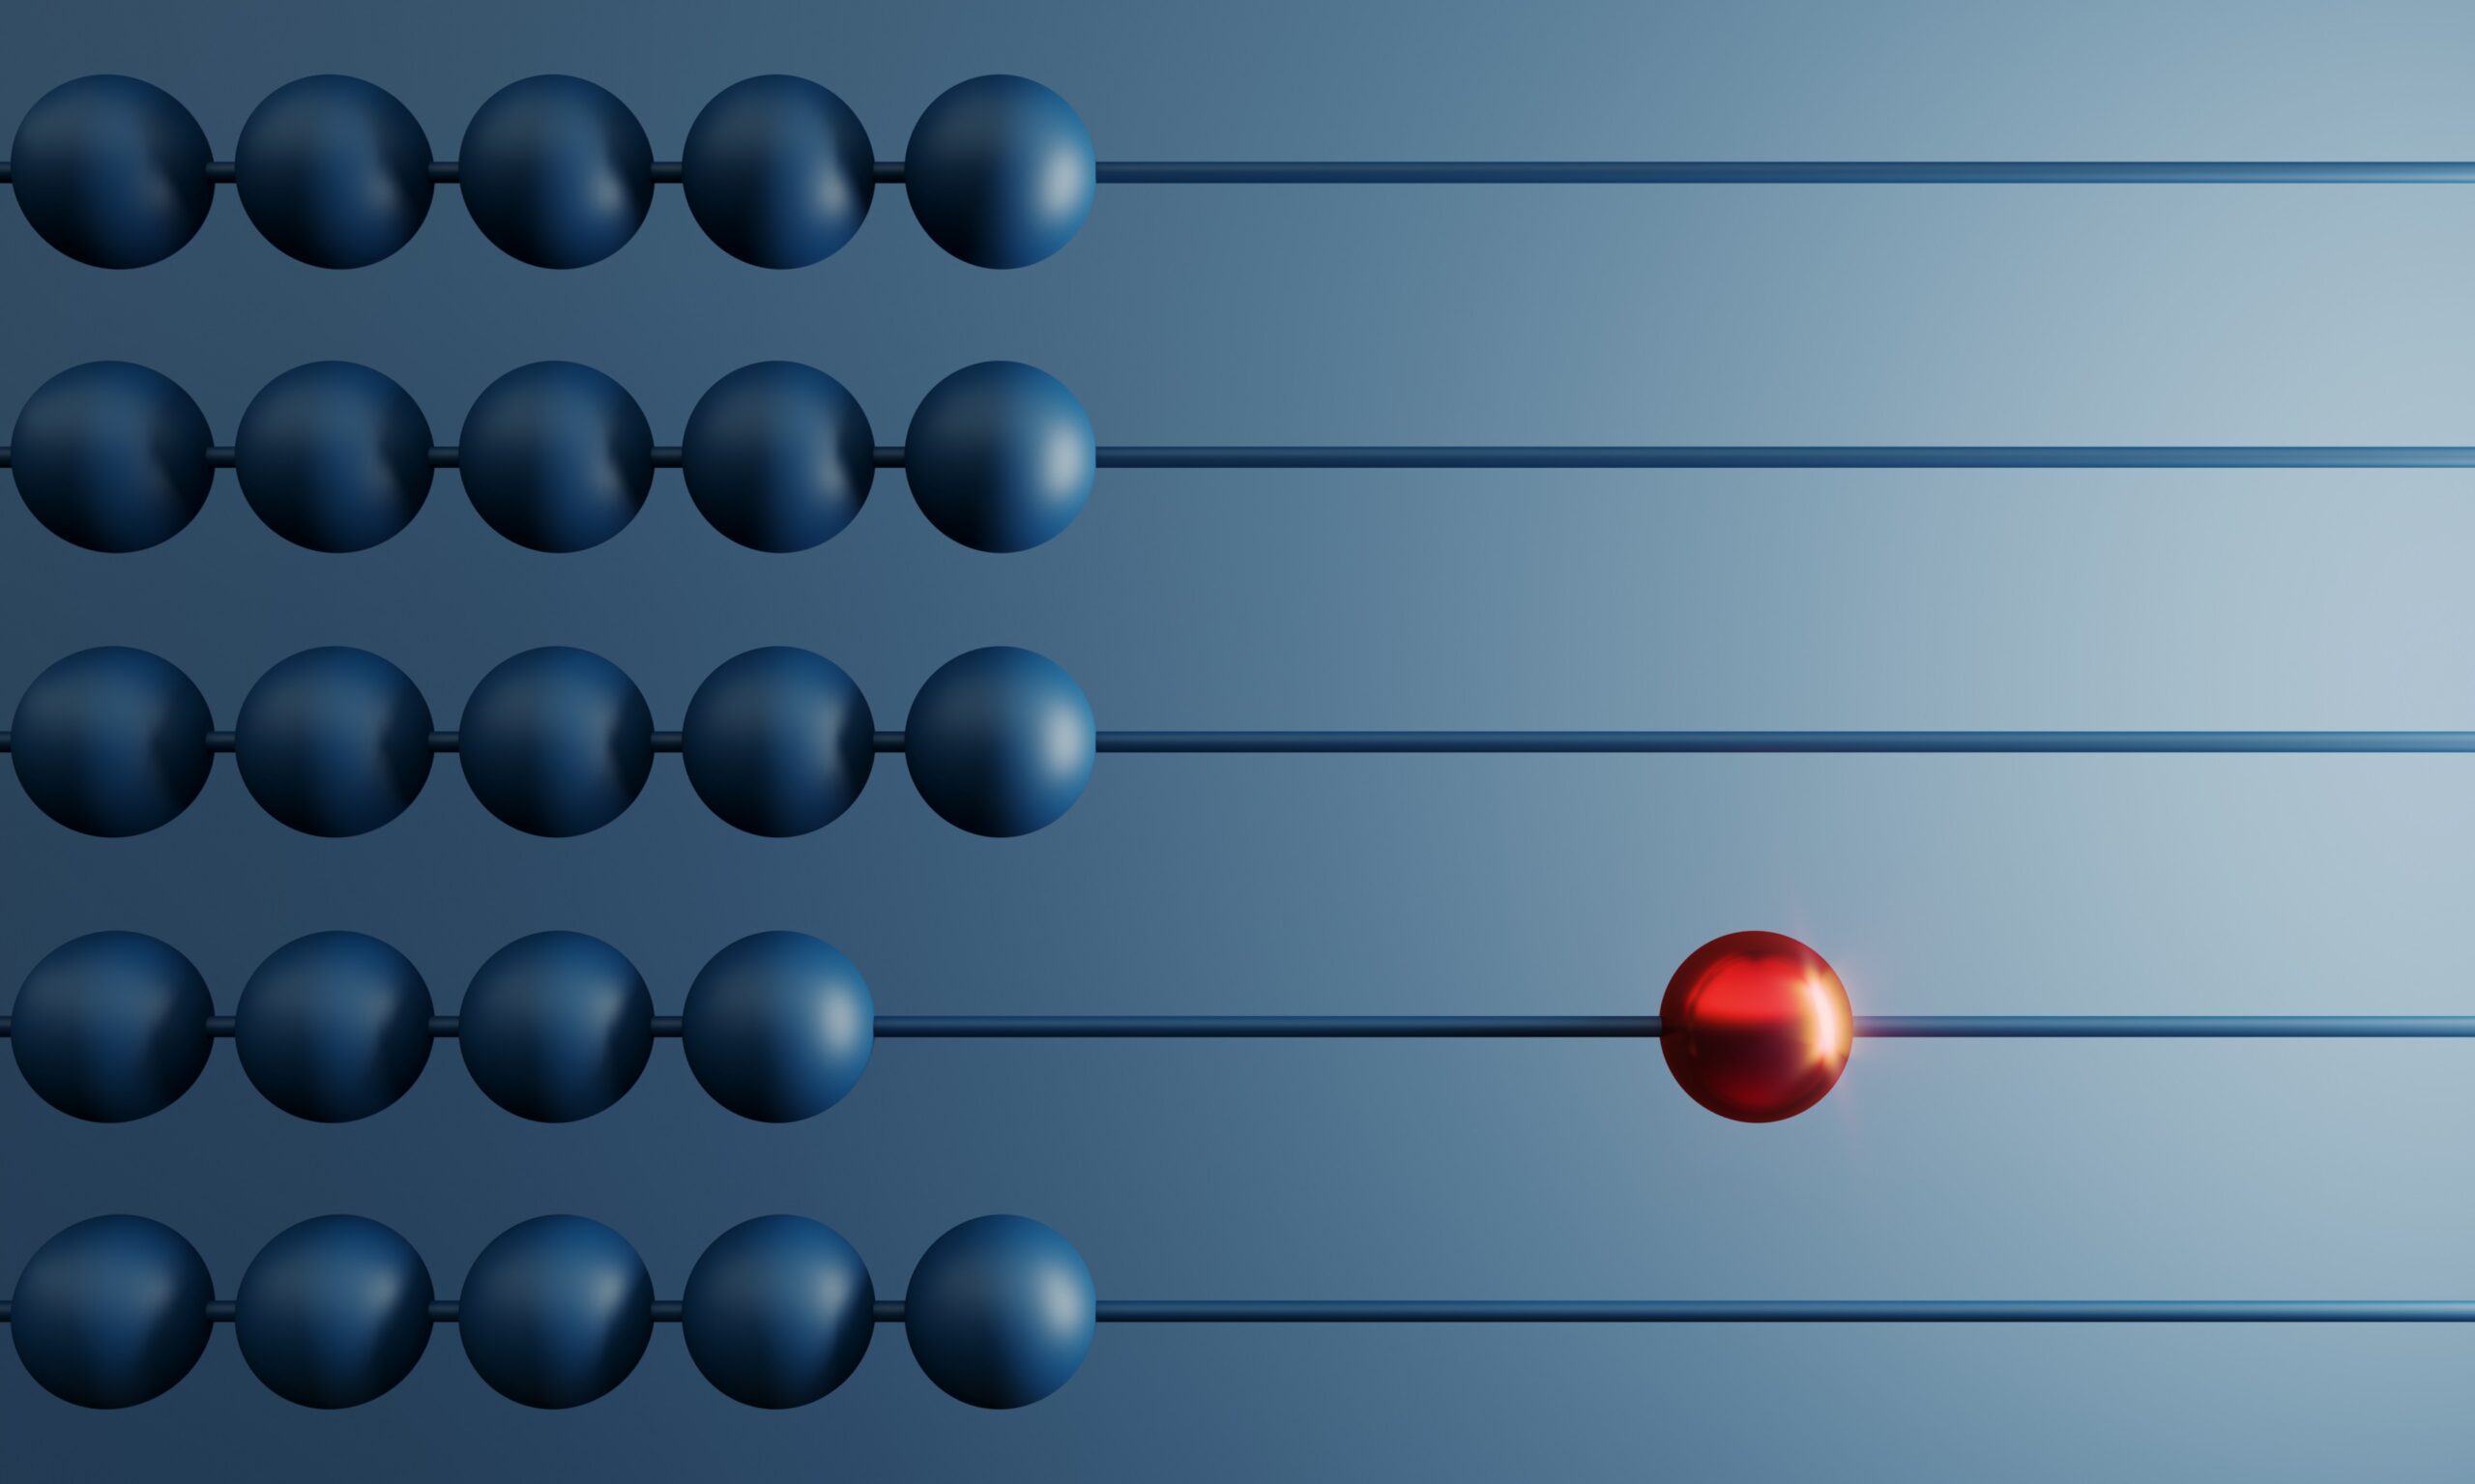 Different red colored ball between others on abacus.